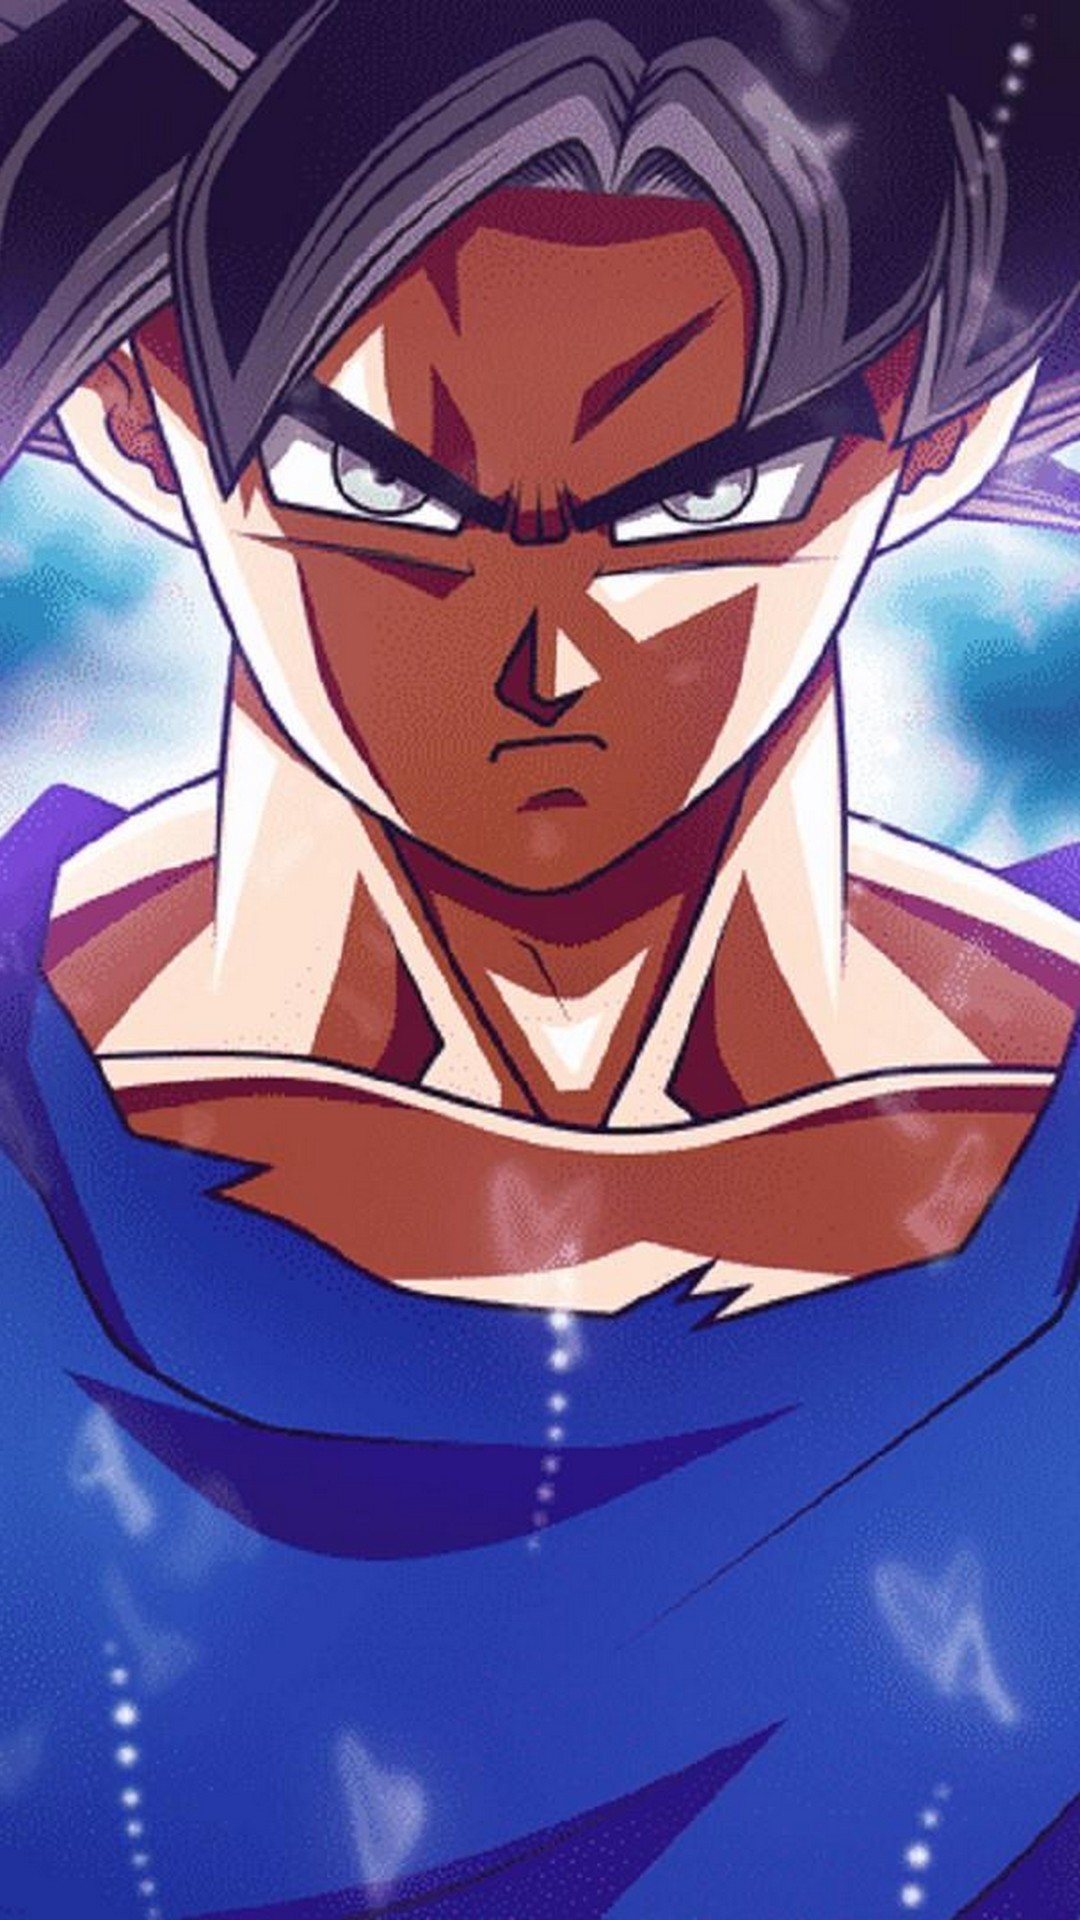 Wallpaper iPhone Goku Imagenes with image resolution 1080x1920 pixel. You can make this wallpaper for your iPhone 5, 6, 7, 8, X backgrounds, Mobile Screensaver, or iPad Lock Screen